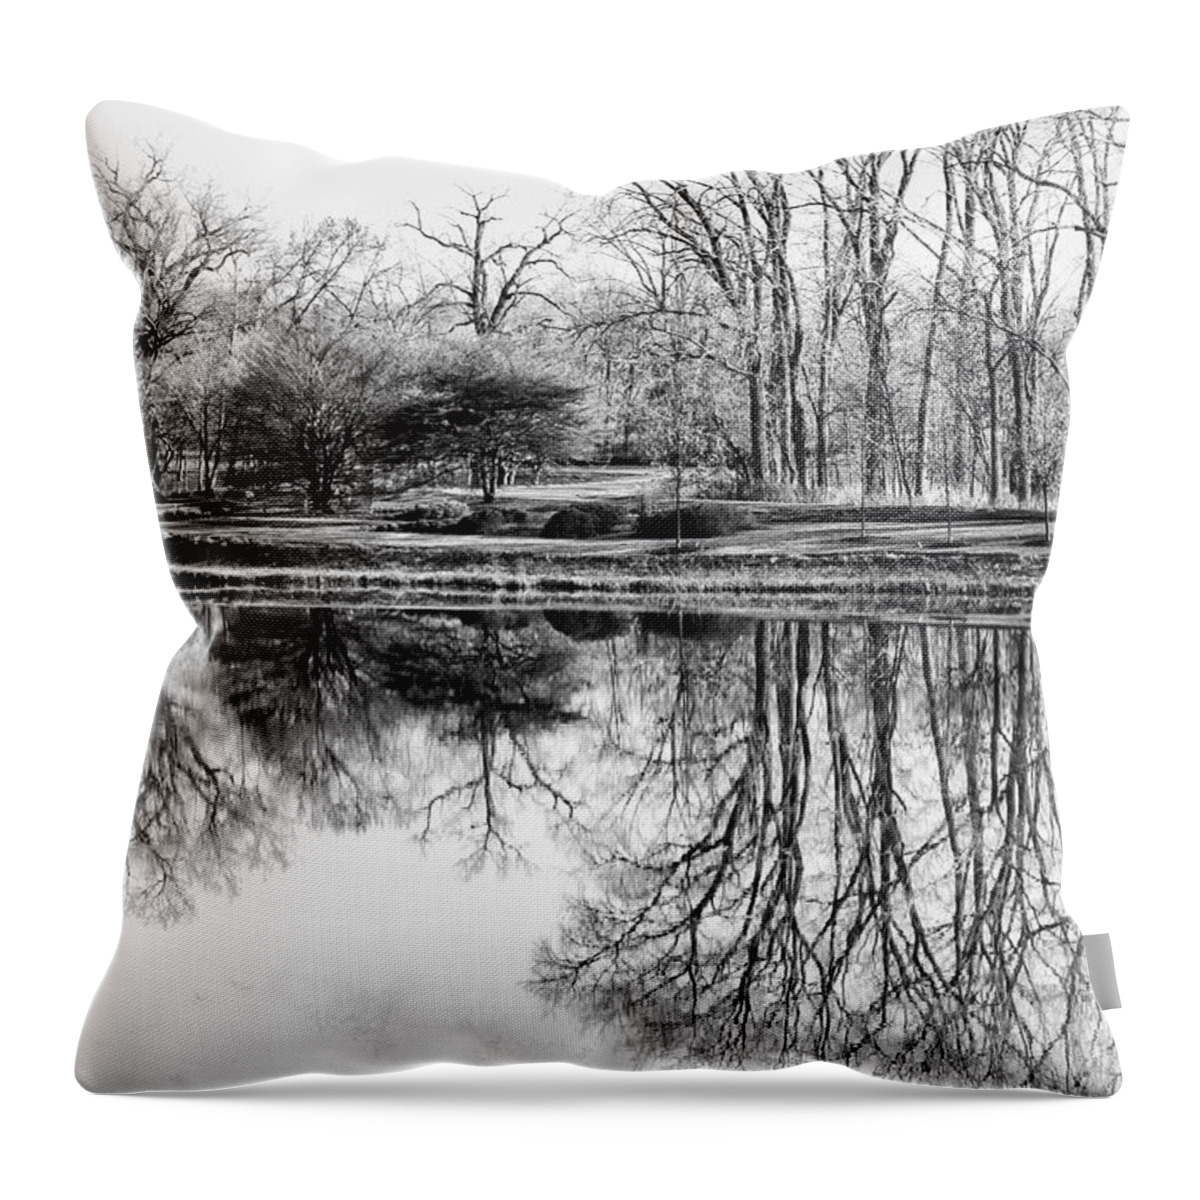 Landscape Throw Pillow featuring the photograph Reflection in Black and White by Julie Palencia